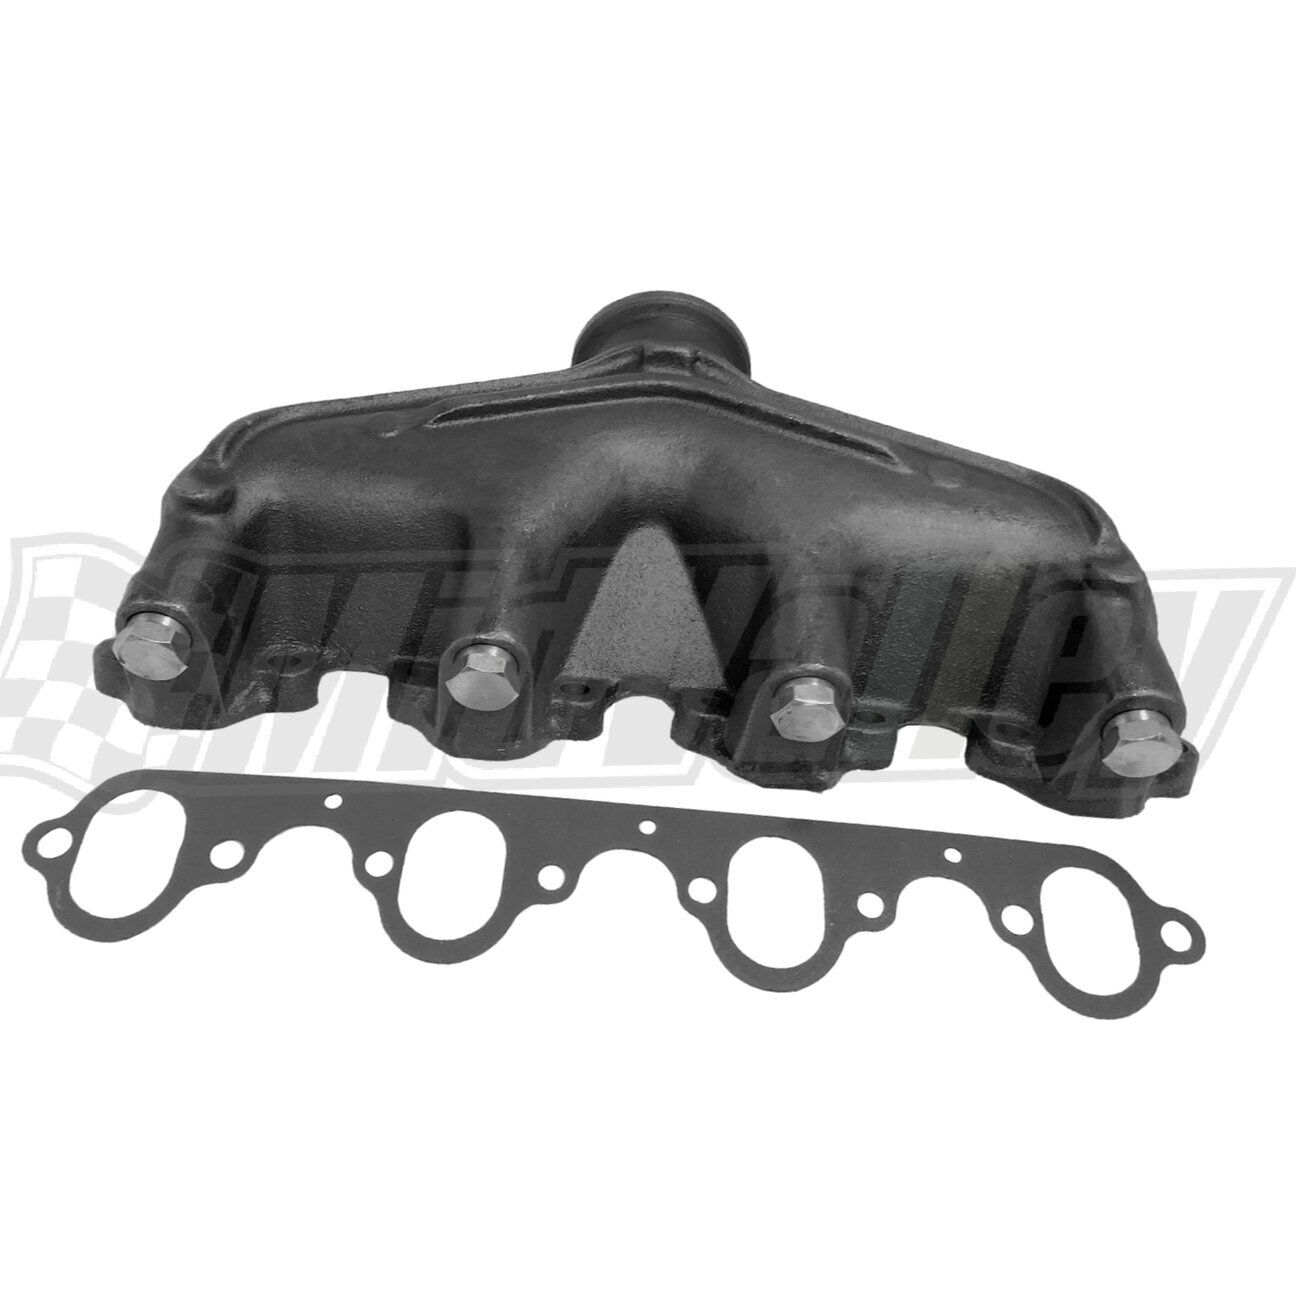 Exhaust Manifold Left or Right for 1979-1991 Ford F700 F600 B700 B600